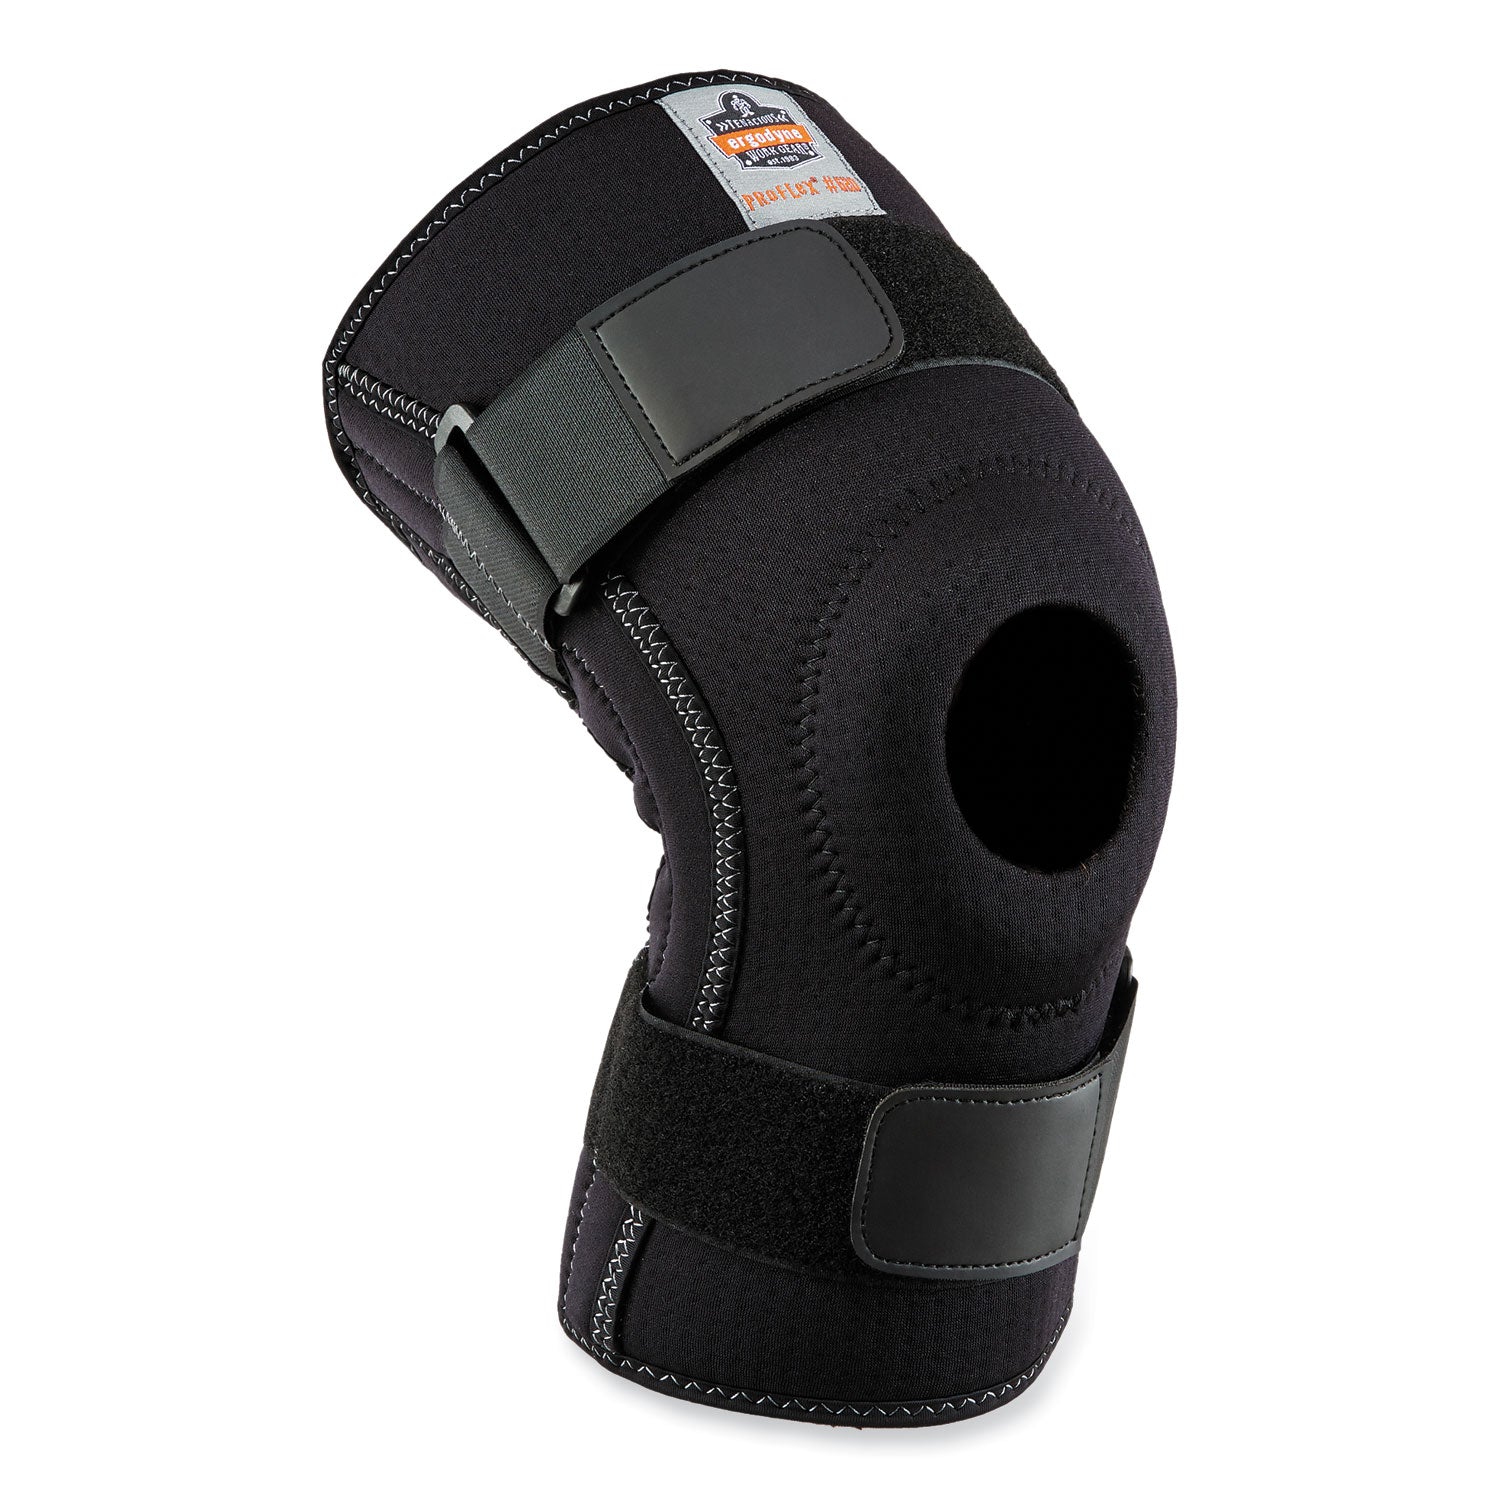 proflex-620-open-patella-spiral-stays-knee-sleeve-2x-large-black-ships-in-1-3-business-days_ego16546 - 1